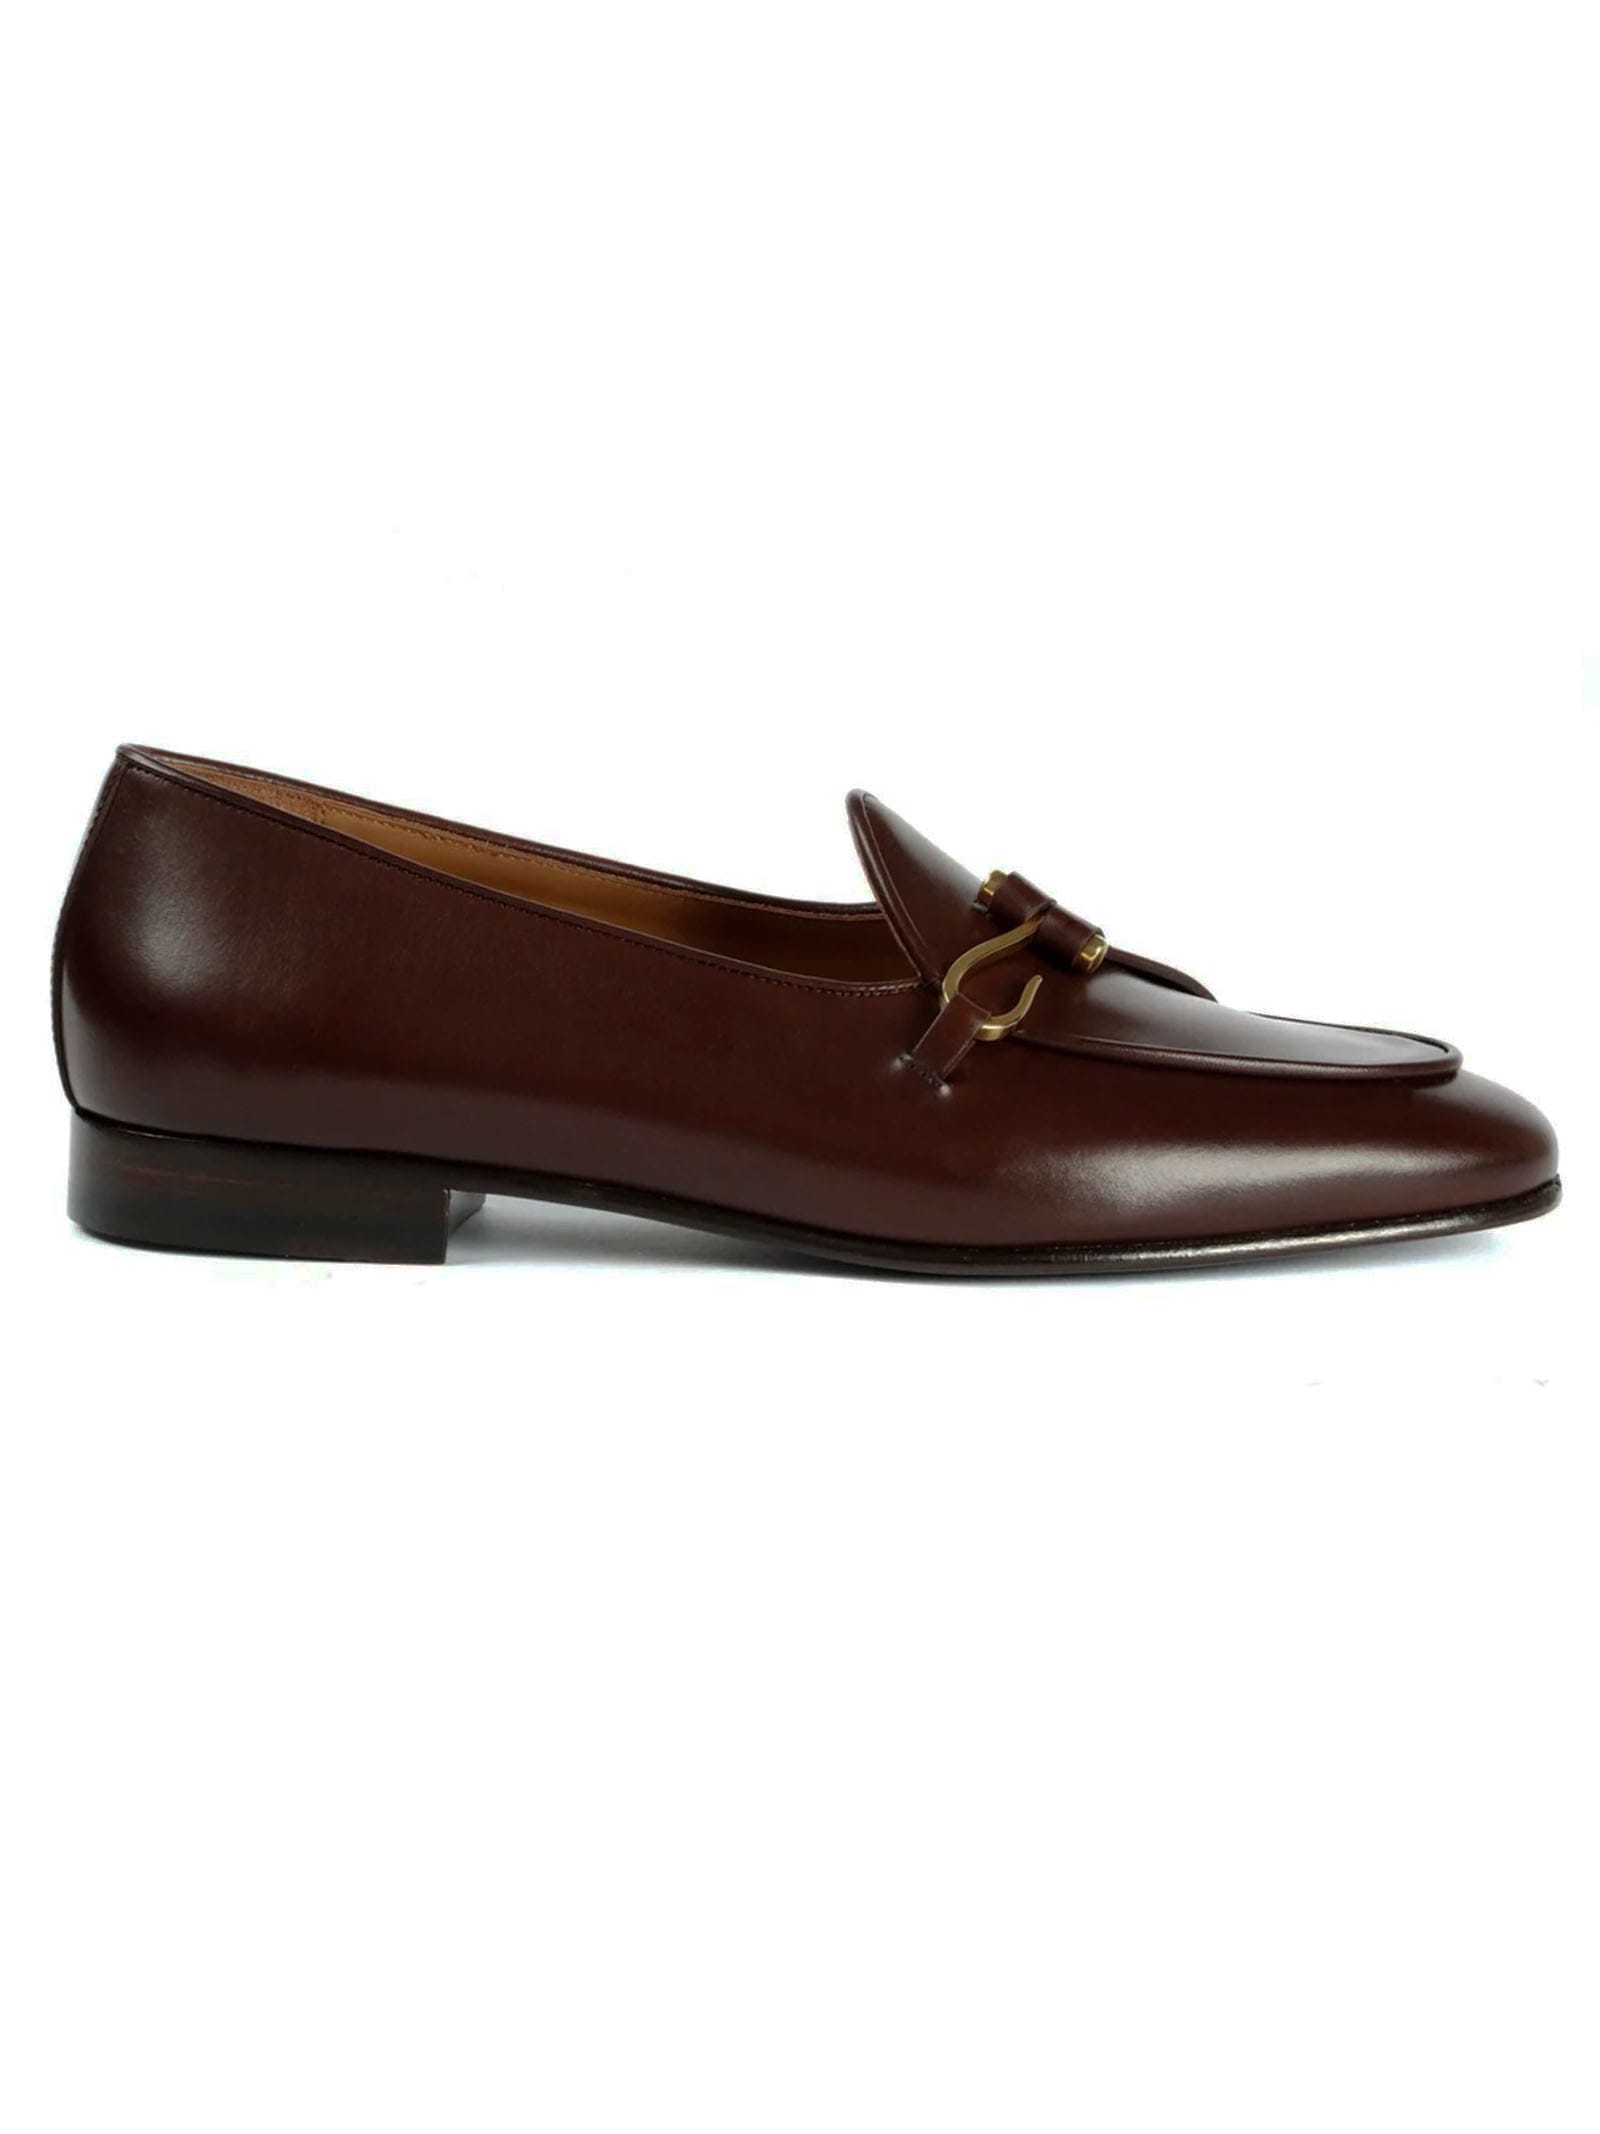 Shop Edhen Milano Brown Calf Leather Comporta Loafers